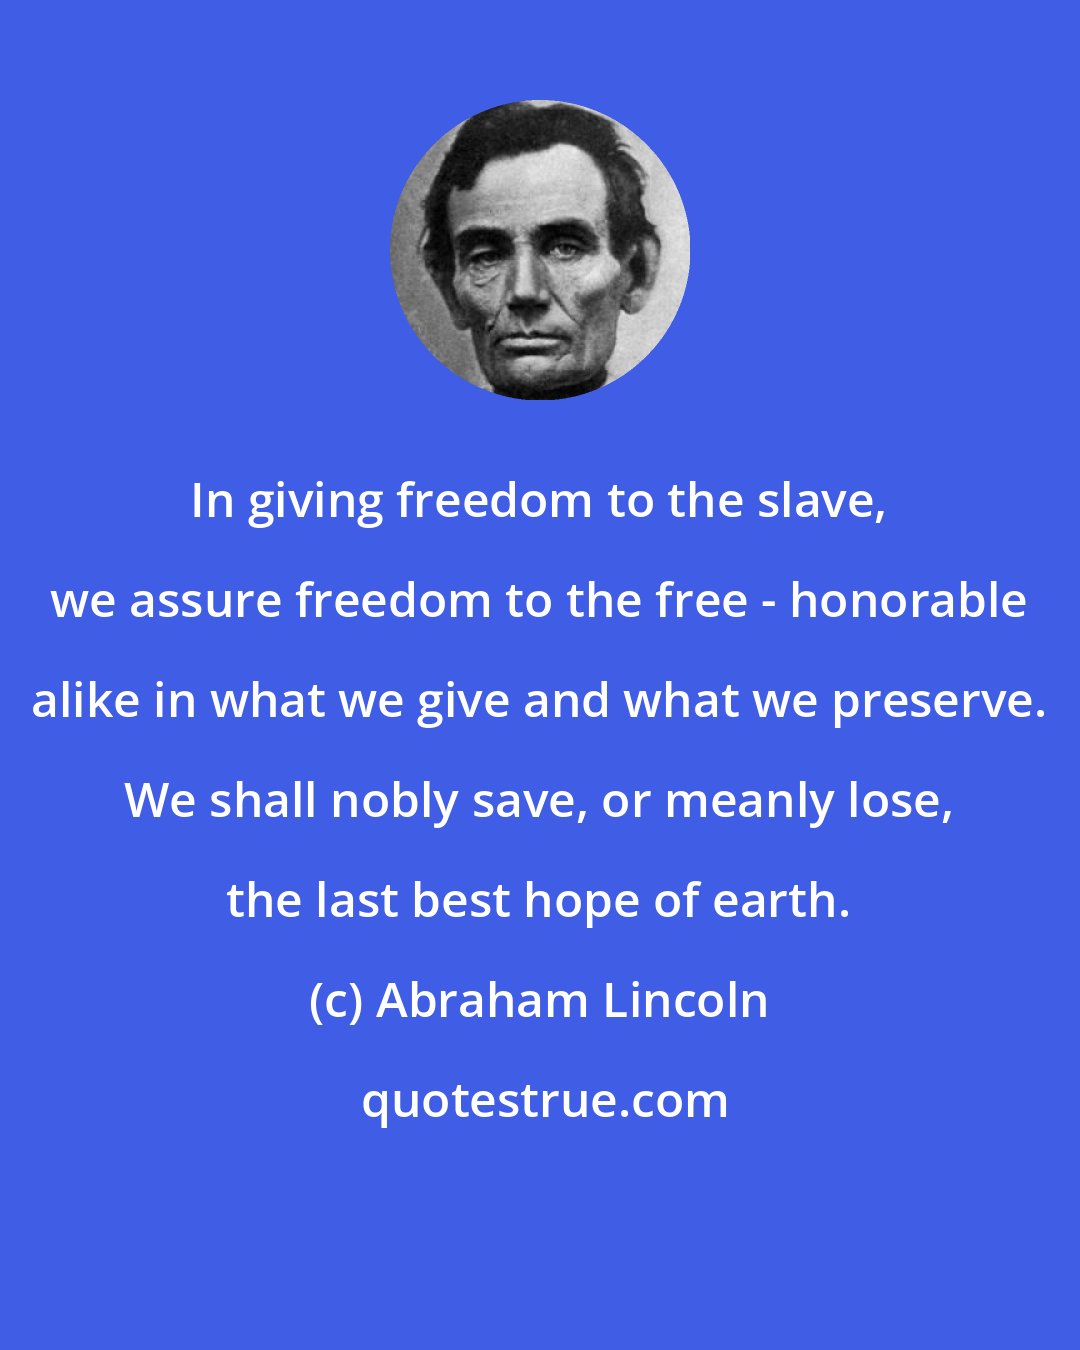 Abraham Lincoln: In giving freedom to the slave, we assure freedom to the free - honorable alike in what we give and what we preserve. We shall nobly save, or meanly lose, the last best hope of earth.